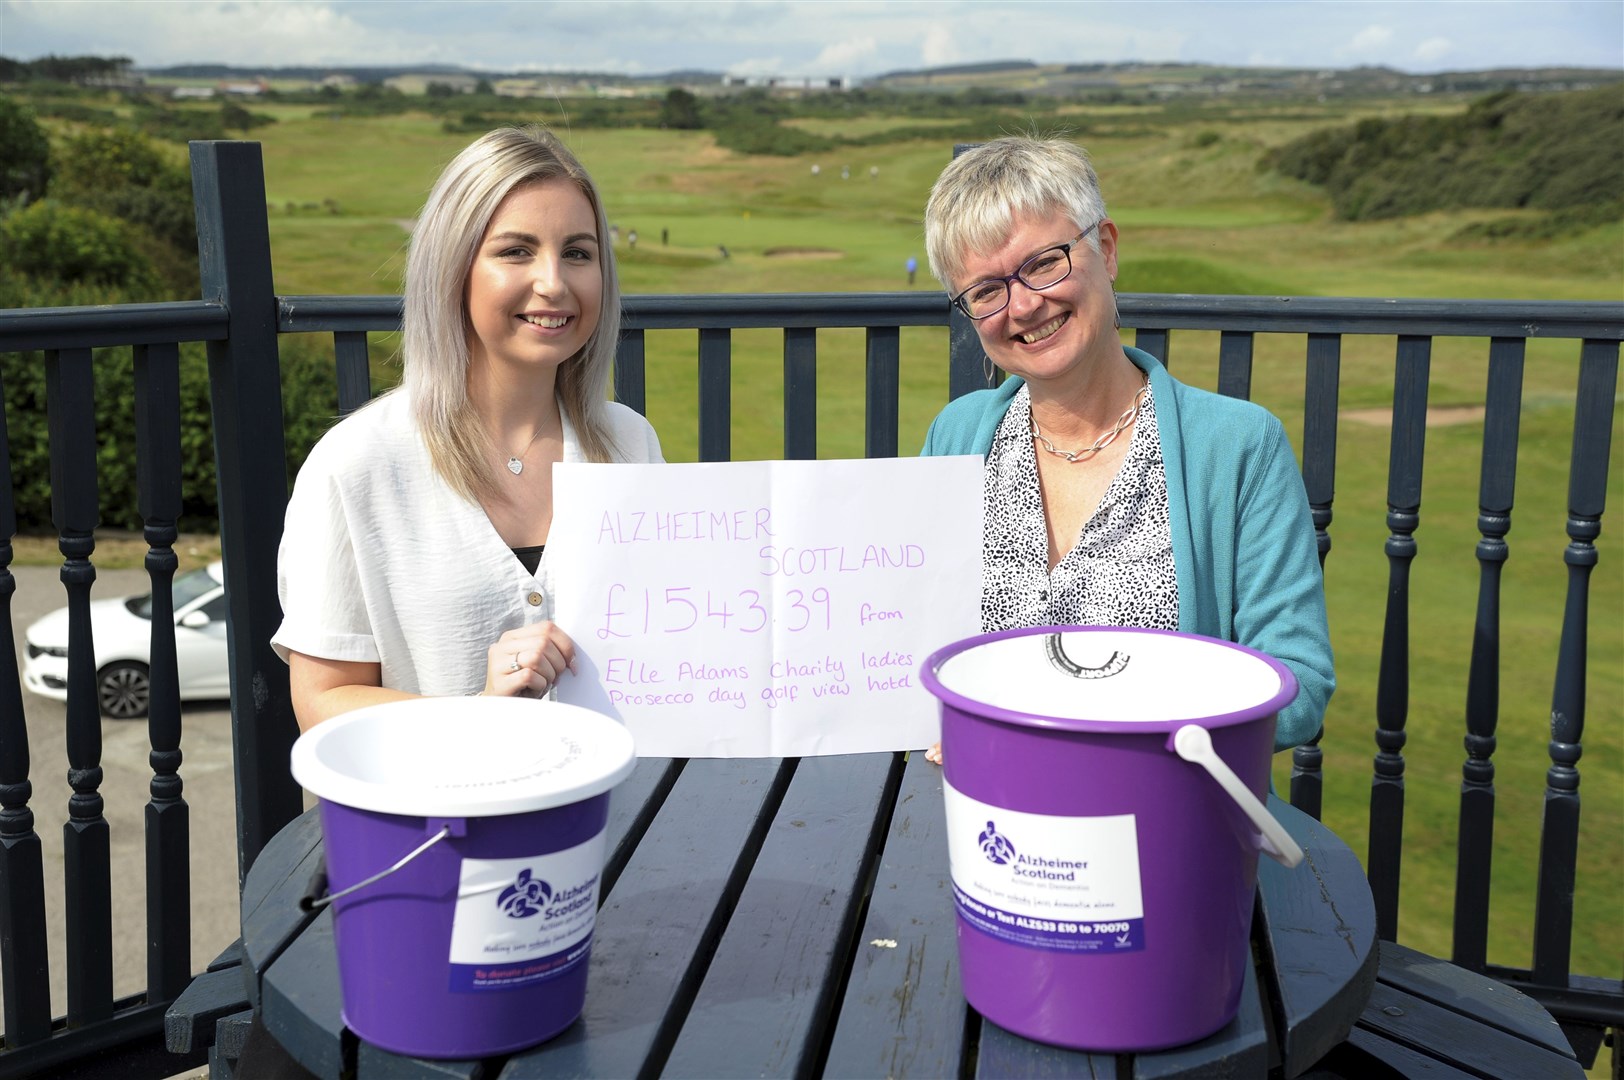 Elle Adams (left) hands over a cheque for £1543 to Alzheimer Scotland Moray advisor Wendy Menzies after a ladies day at the Golf View Hotel in Lossiemouth.